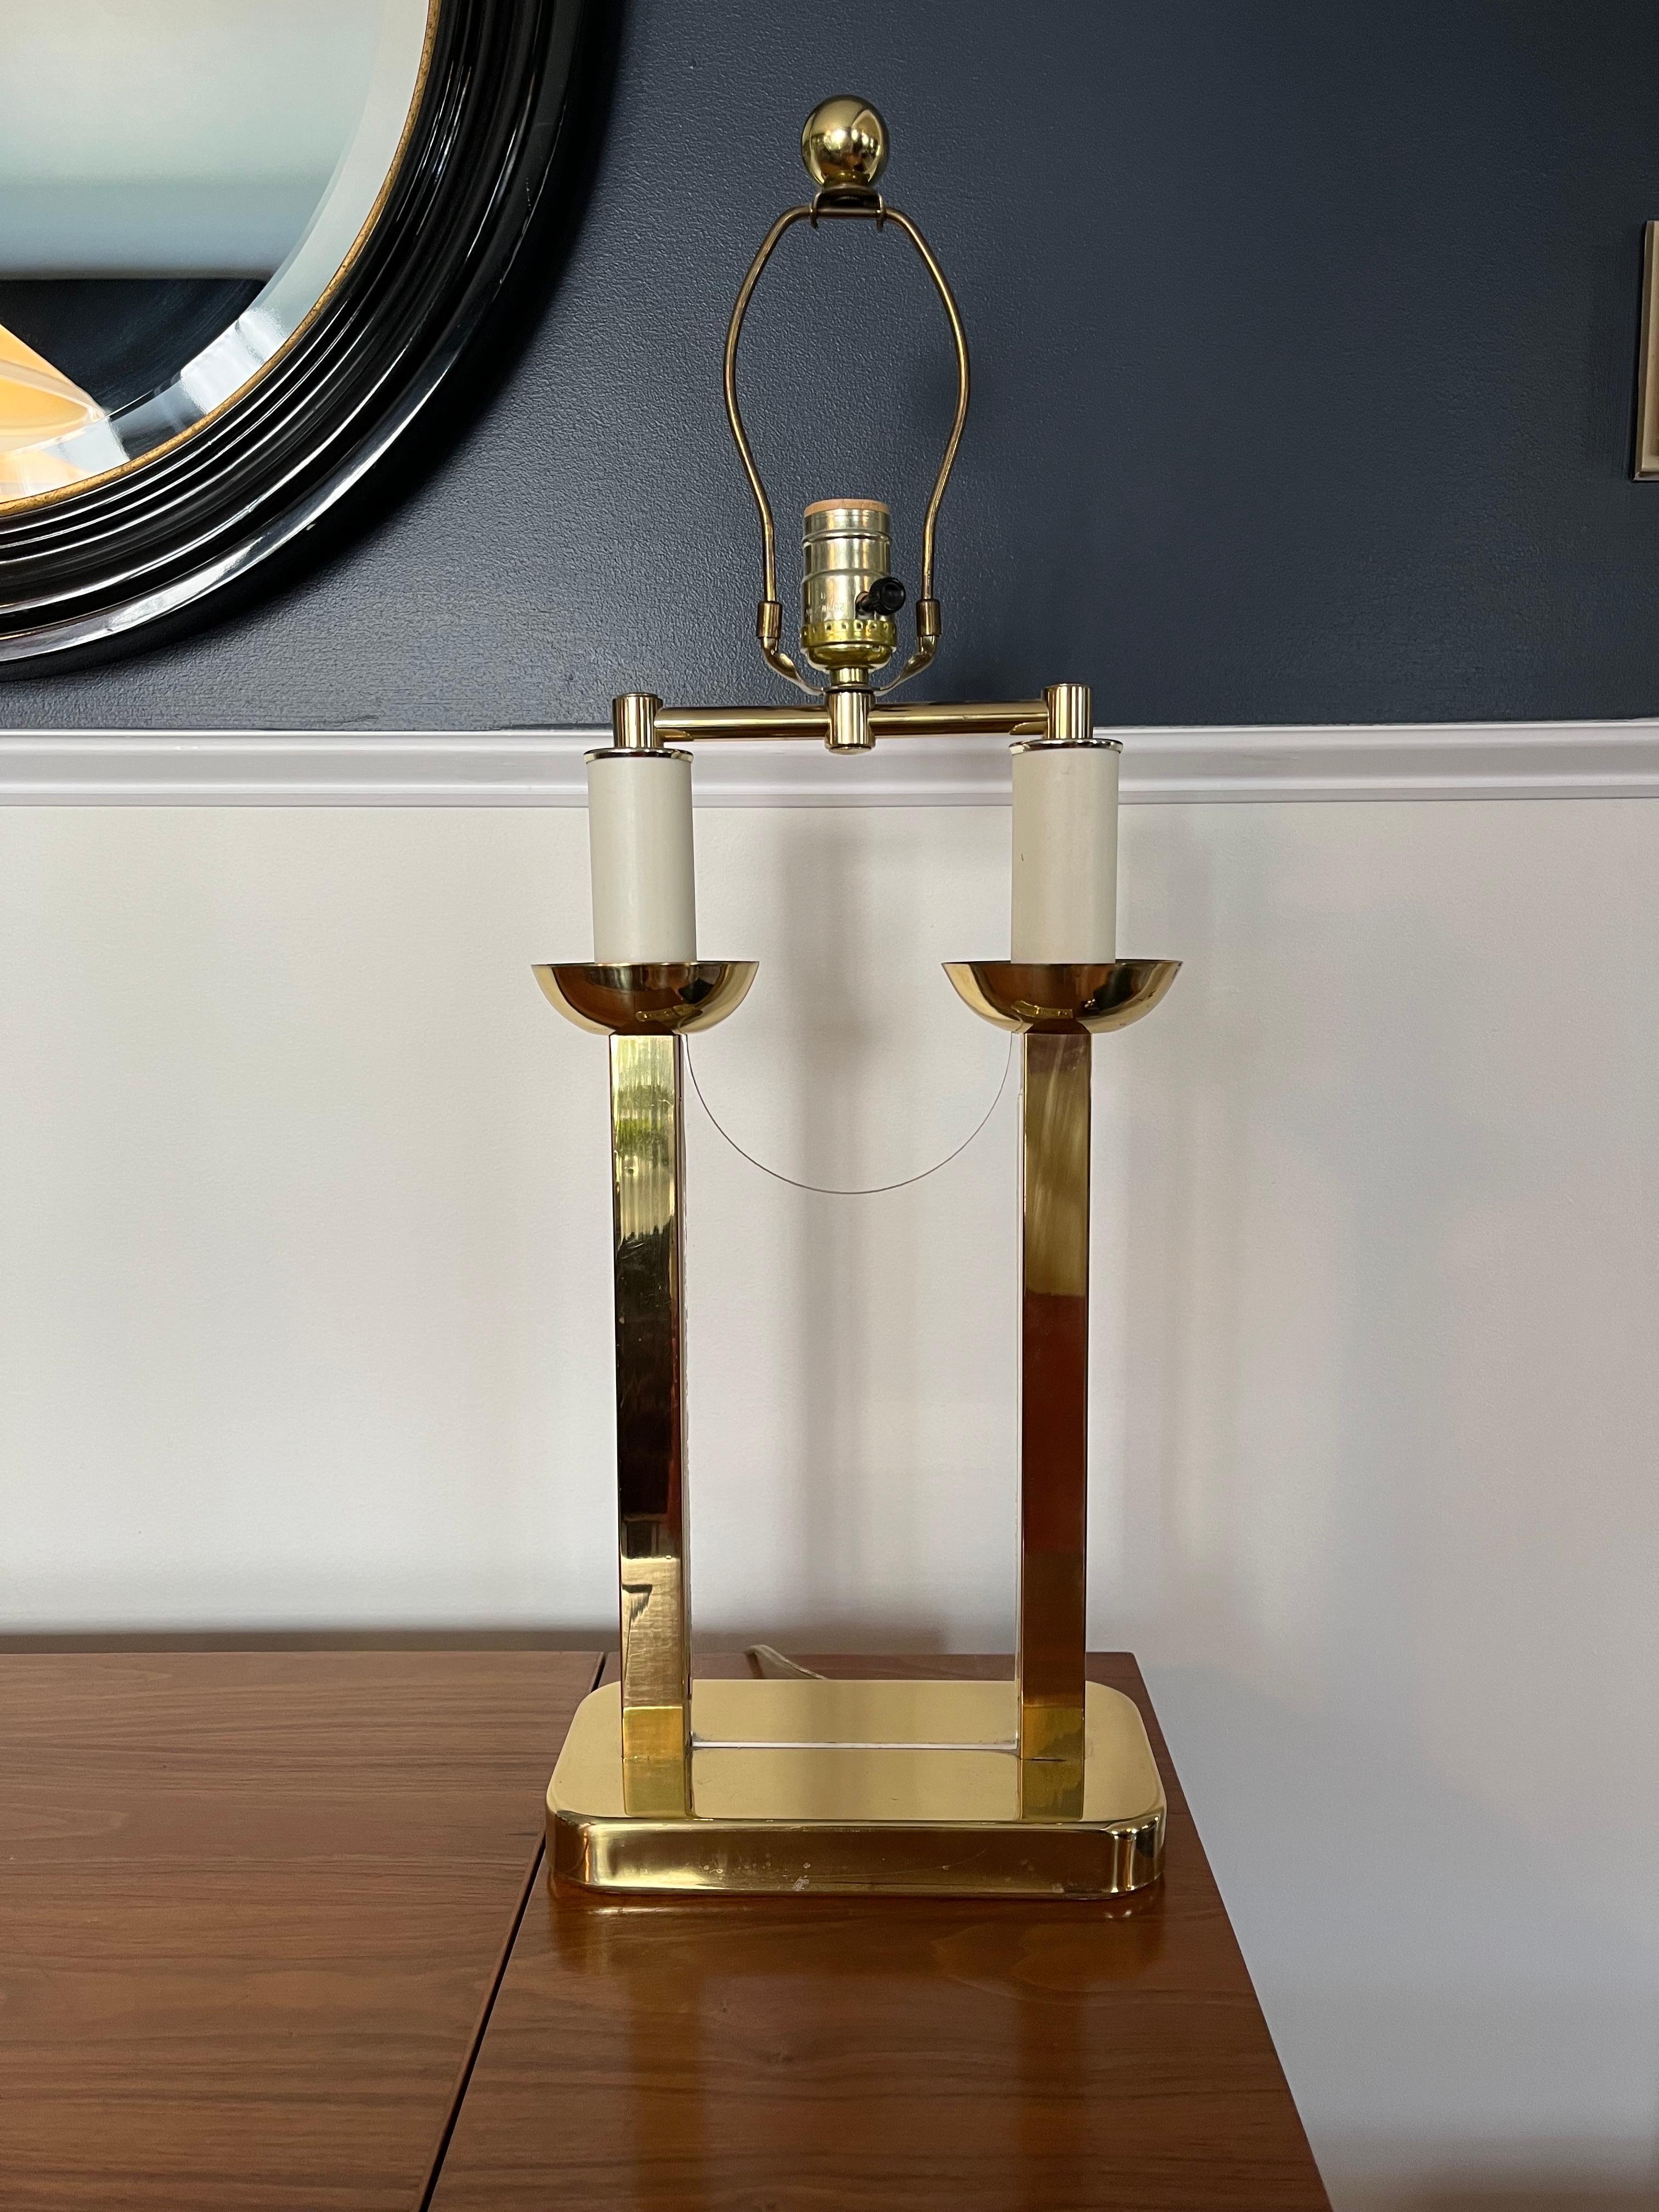 Great modern twist on the classic bouillotte lamp. Brass candle sticks lucite panel to separate. Clean sophisticated lines in the manner of Tommi Parzinger. 